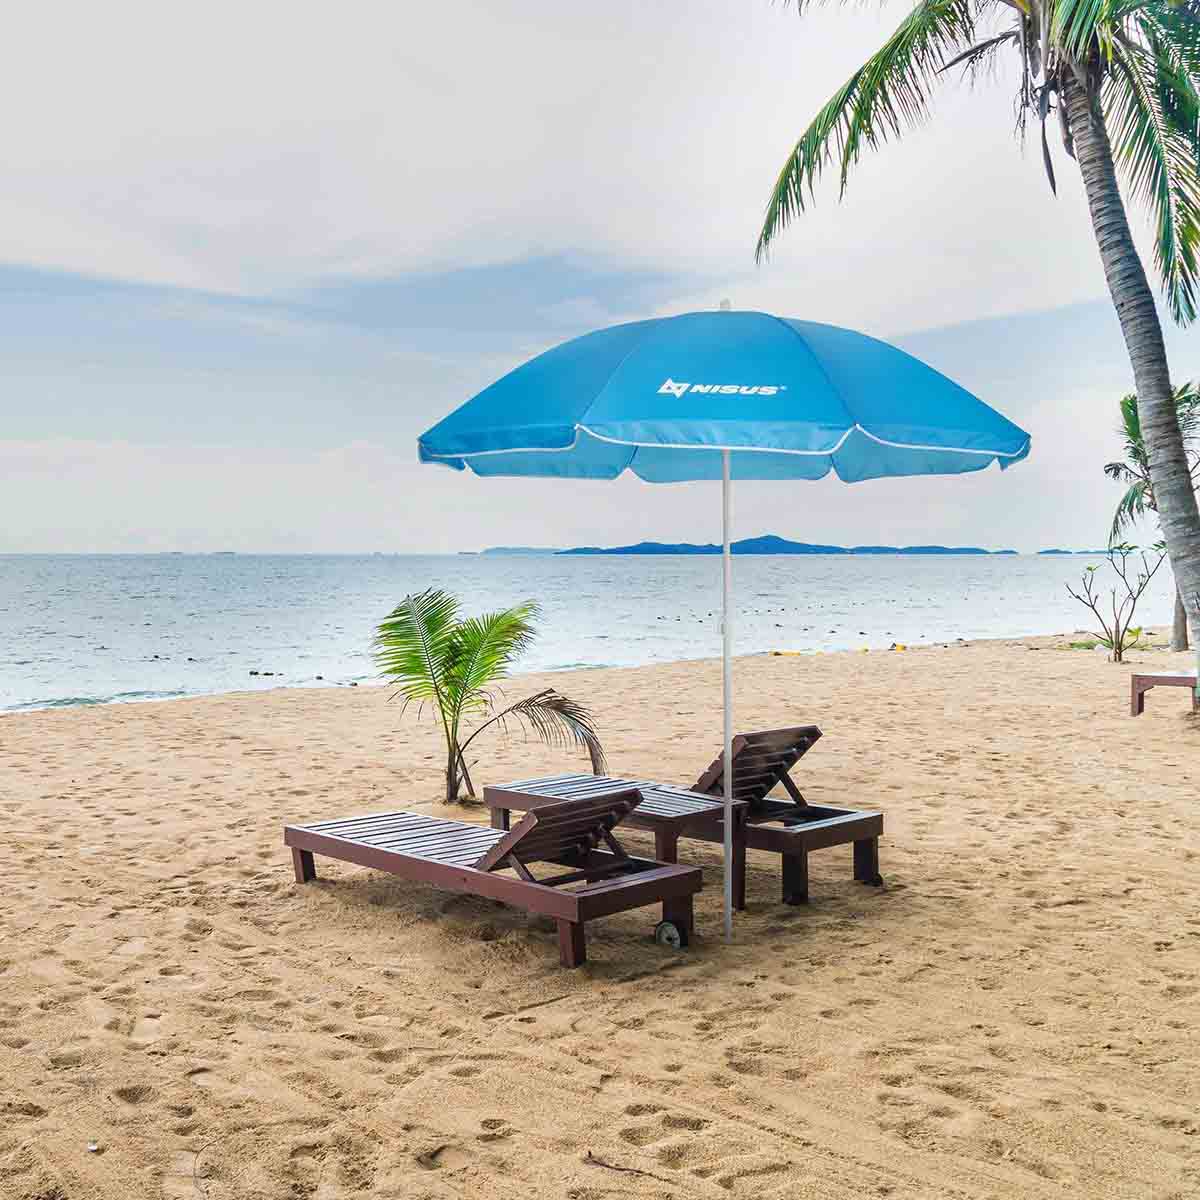 Blue Folding Beach Umbrella standing between the two loungers at the beach